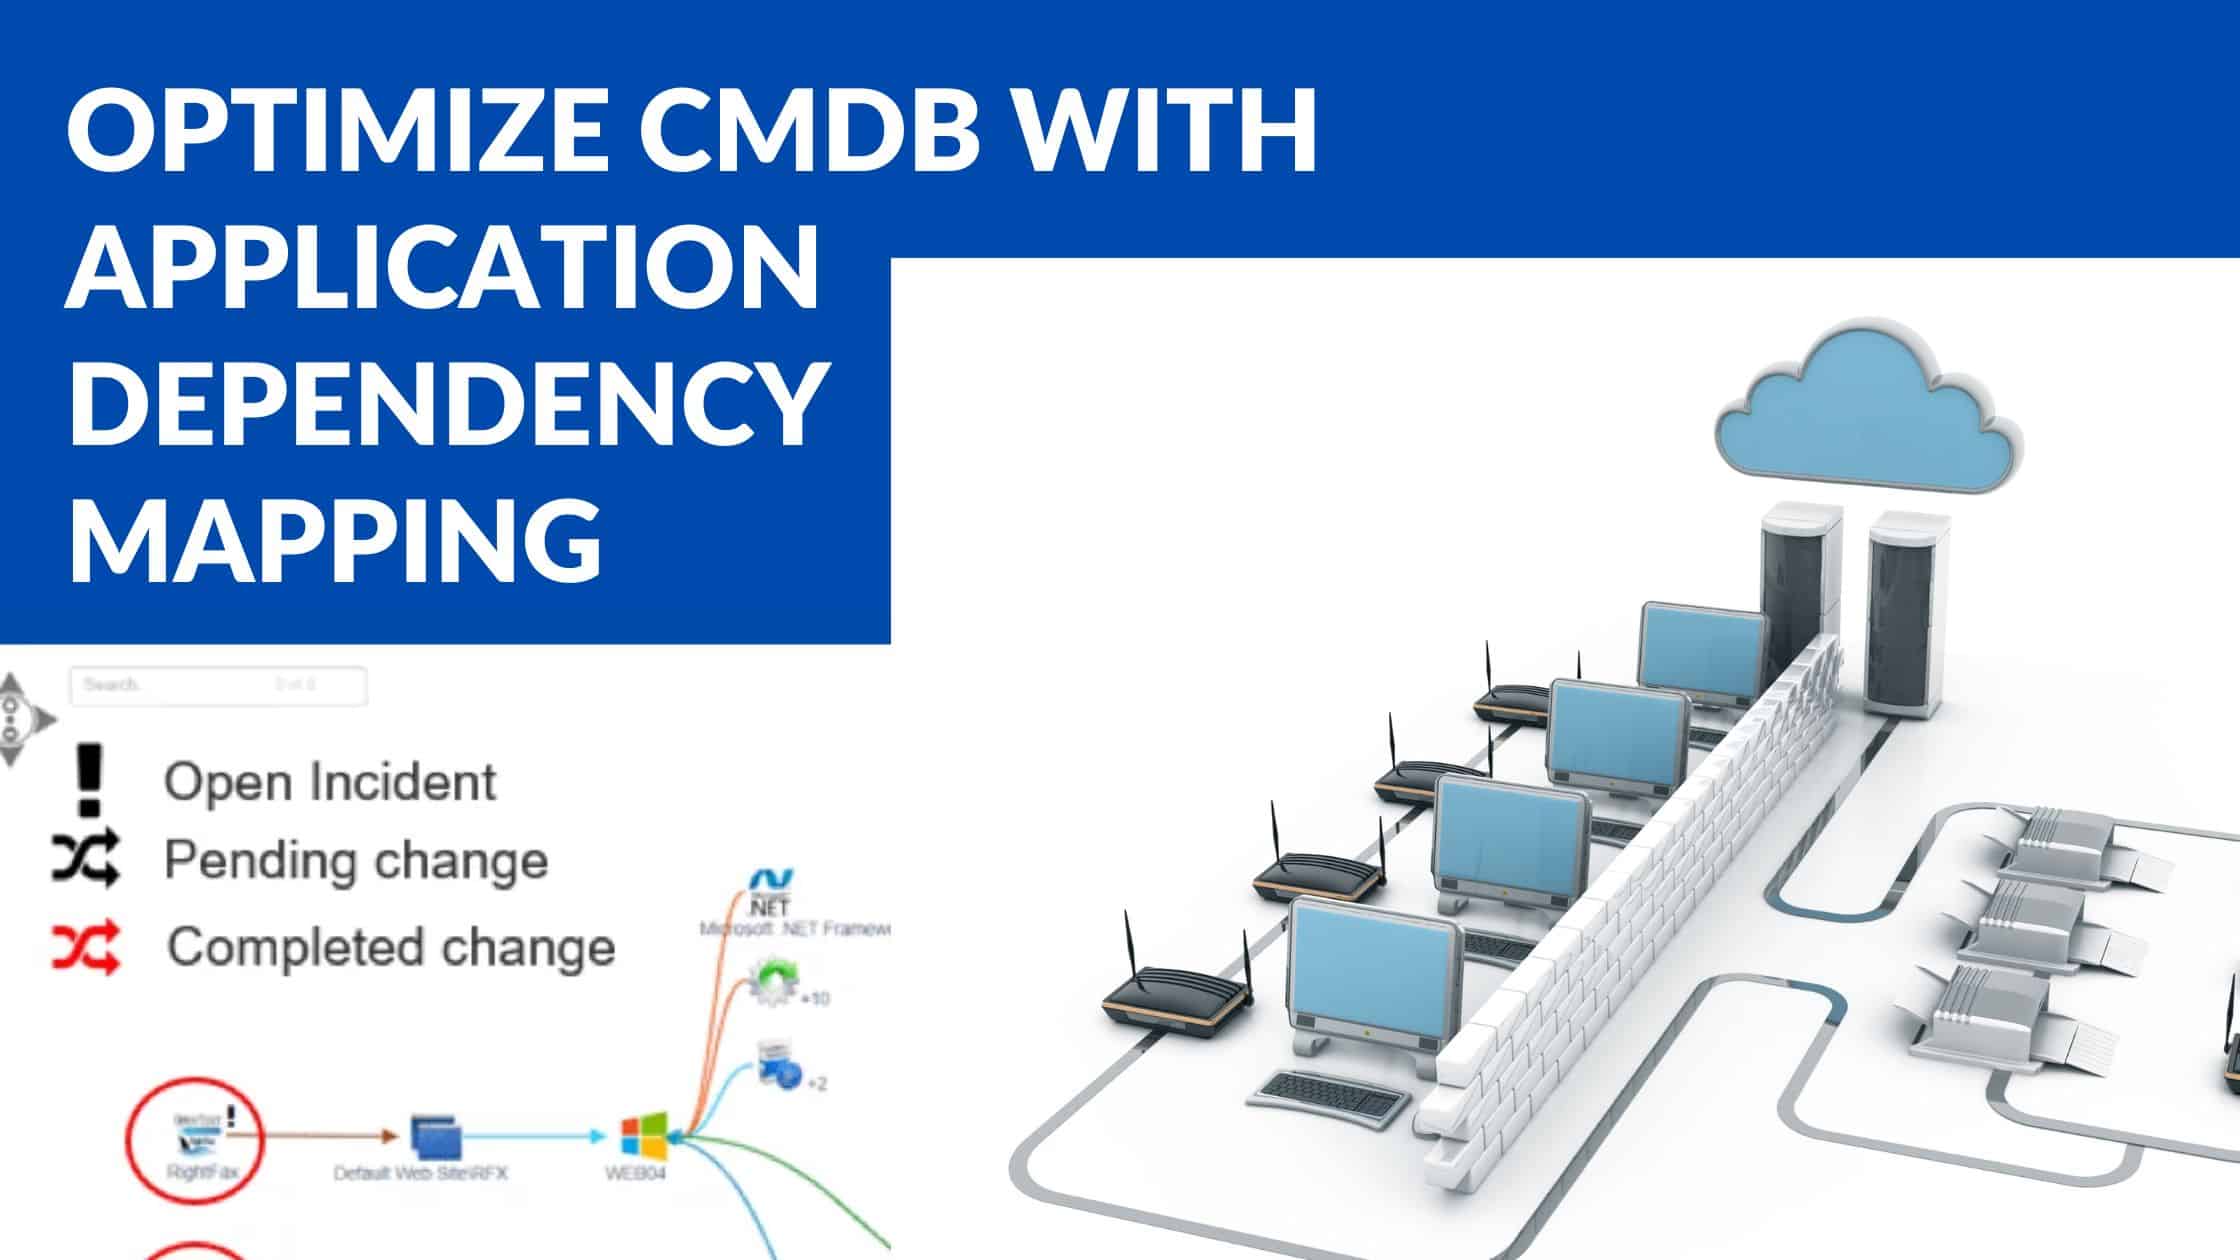 CMDB with application dependency mapping